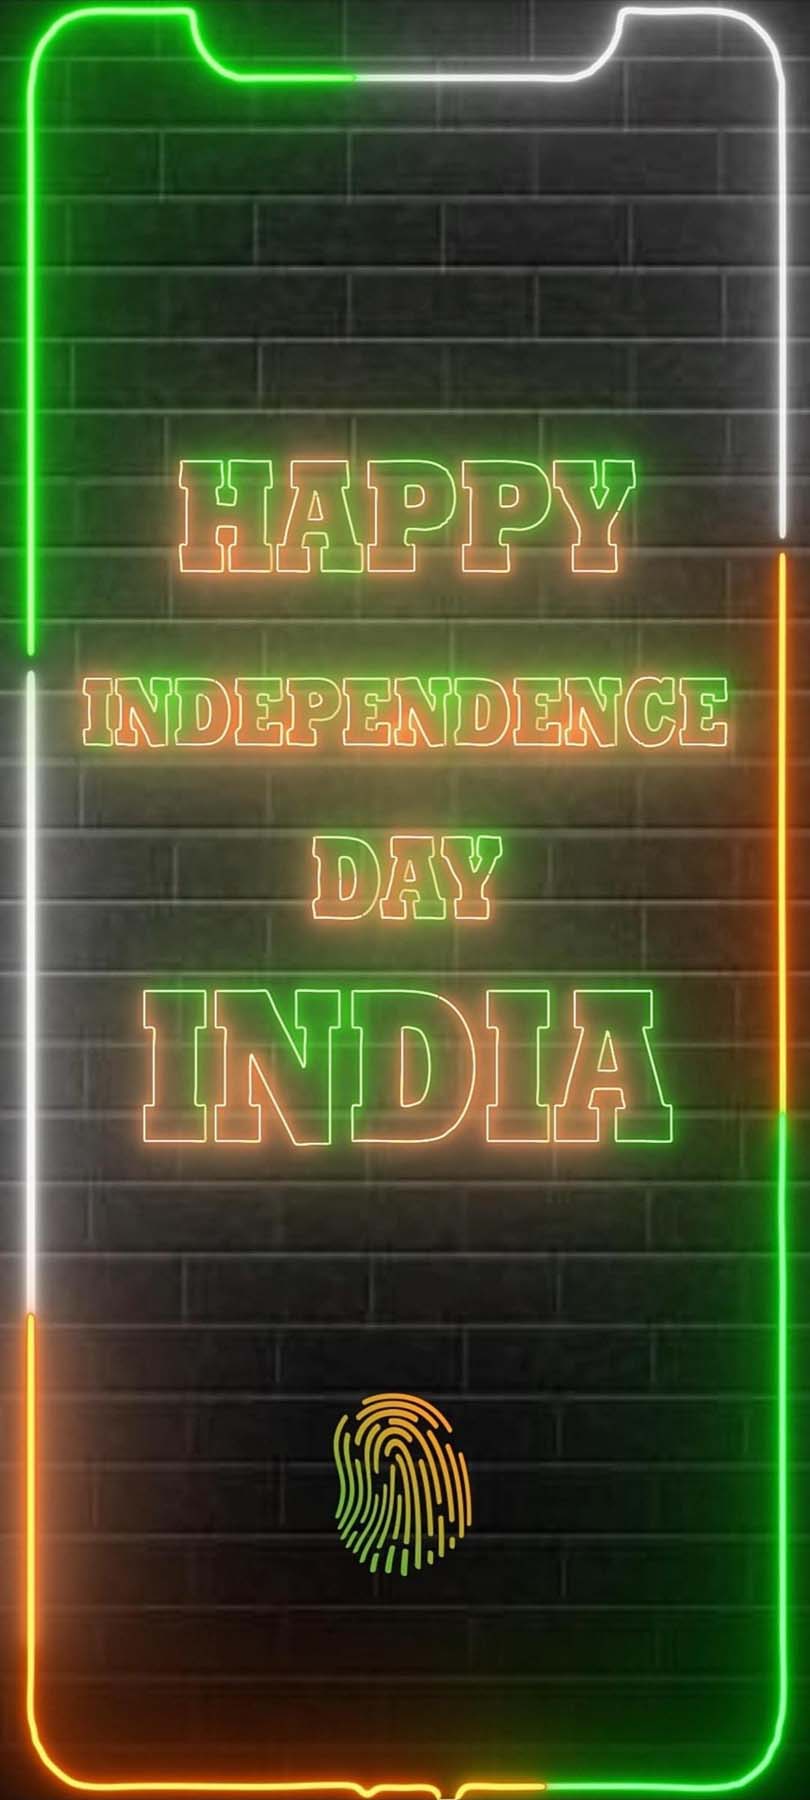 Happy Independence Day India IPhone Wallpaper - IPhone Wallpapers : iPhone  Wallpapers